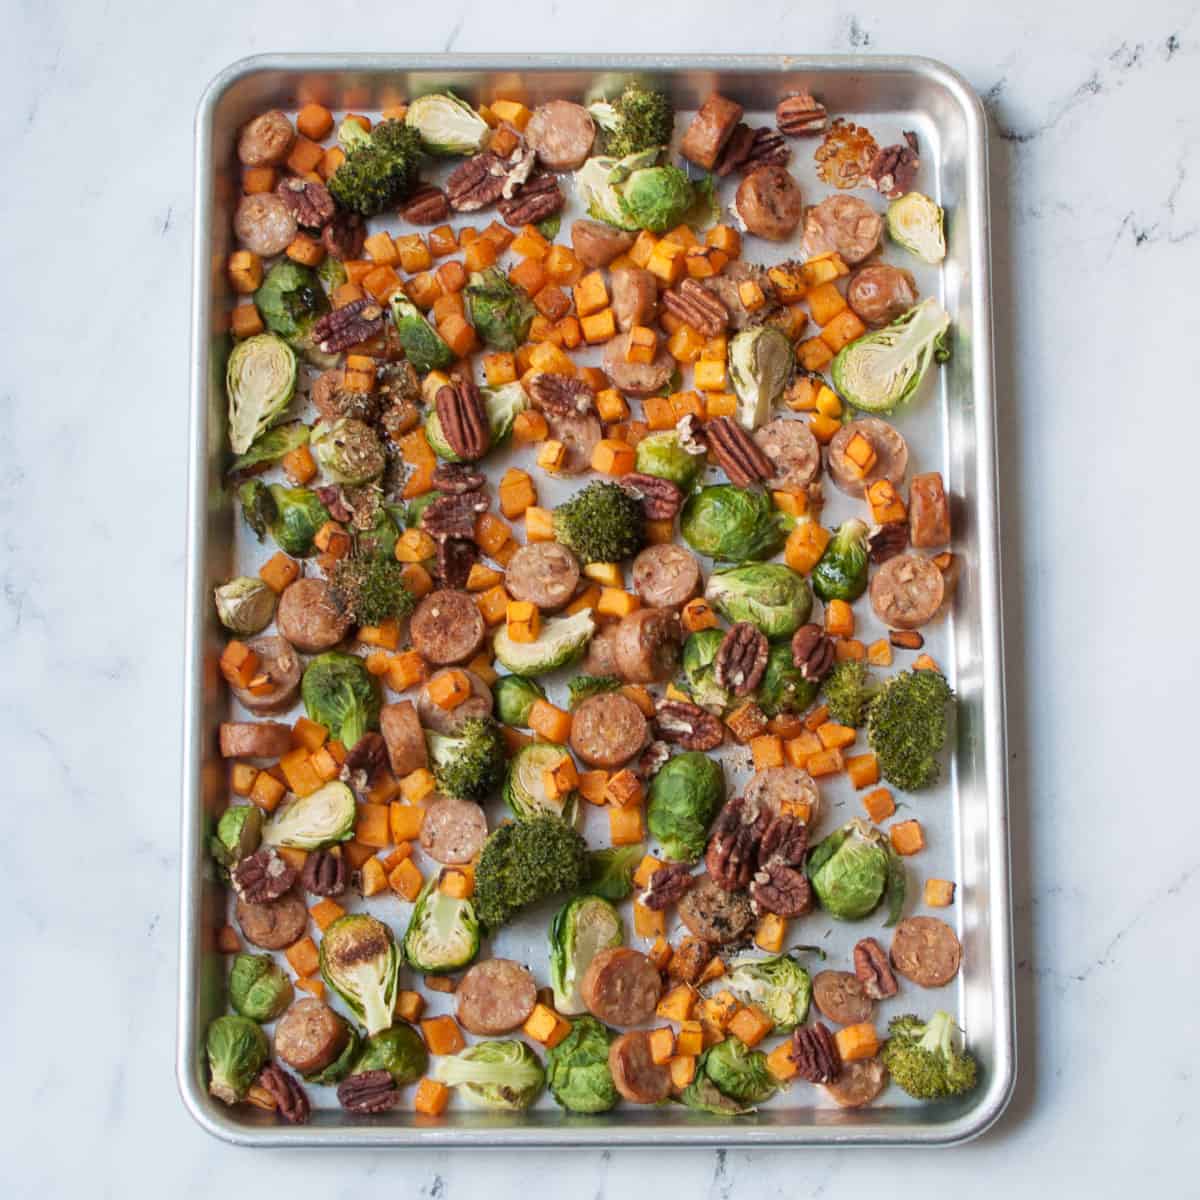 Harvest Sheet Pan Dinner (apple sausage, butternut squash, pecans, broccoli, and brussels sprouts) on a sheet pan